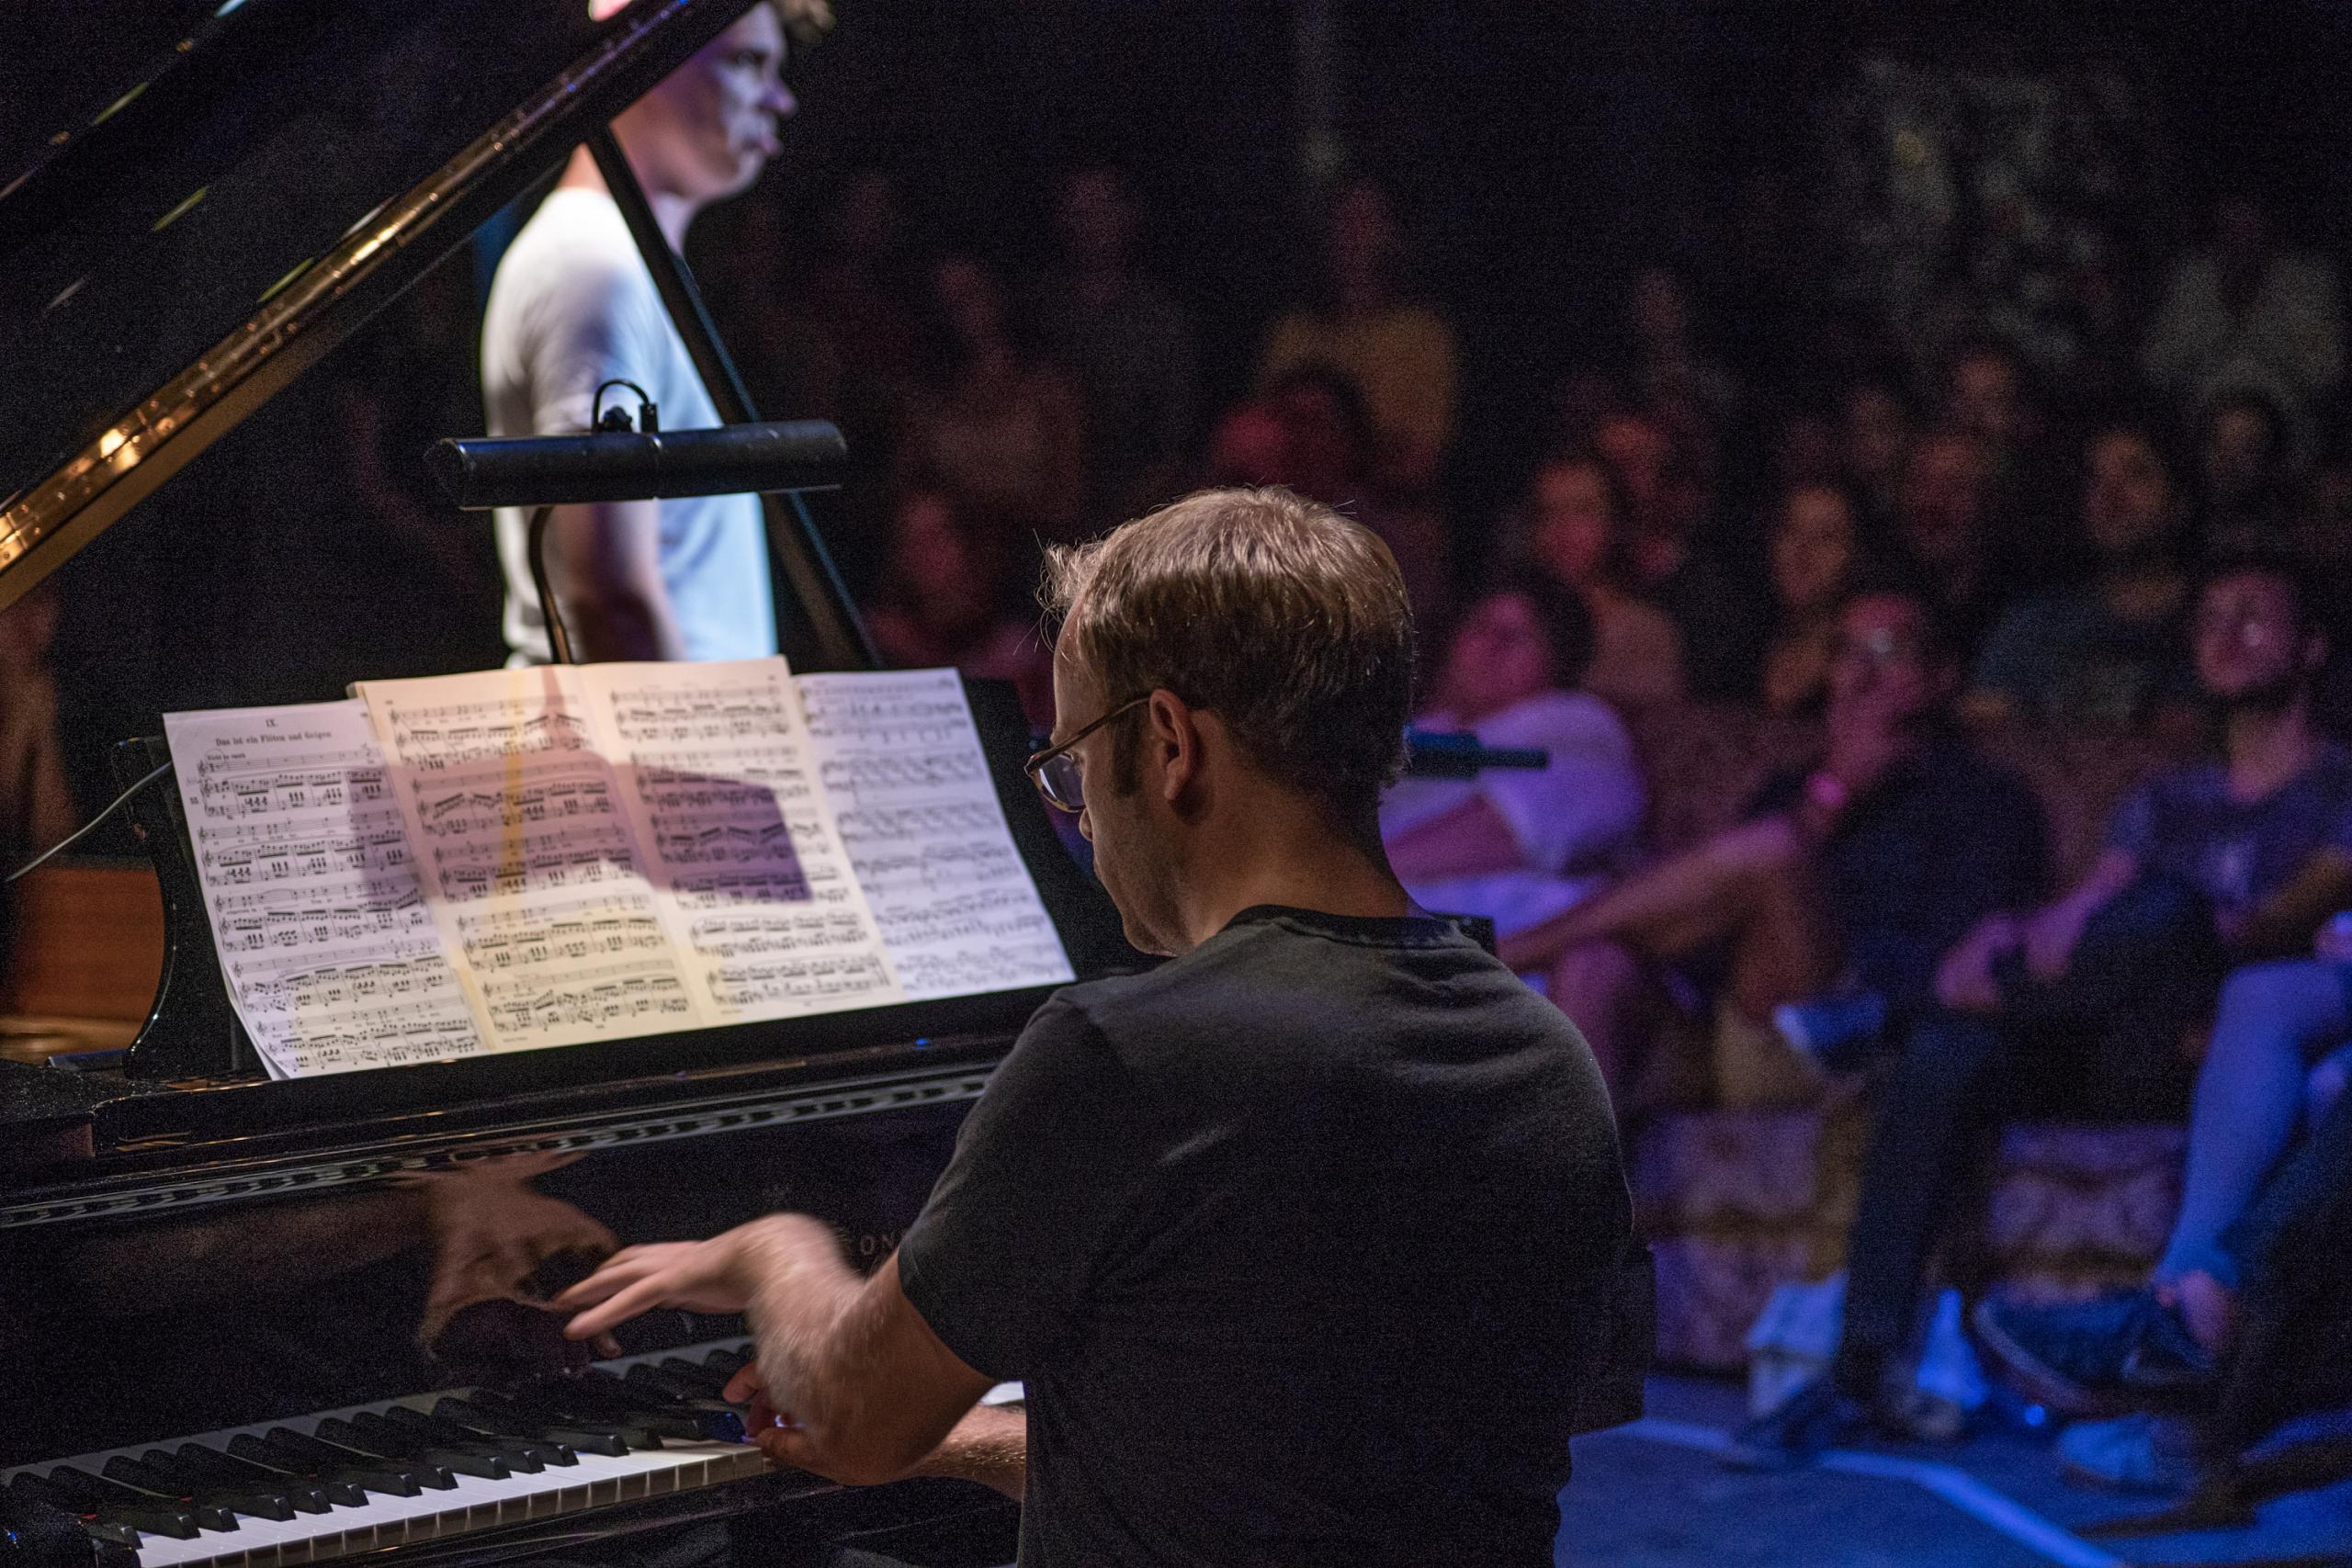 A man plays the grand piano, blurred you can see a singer standing in front of an audience
